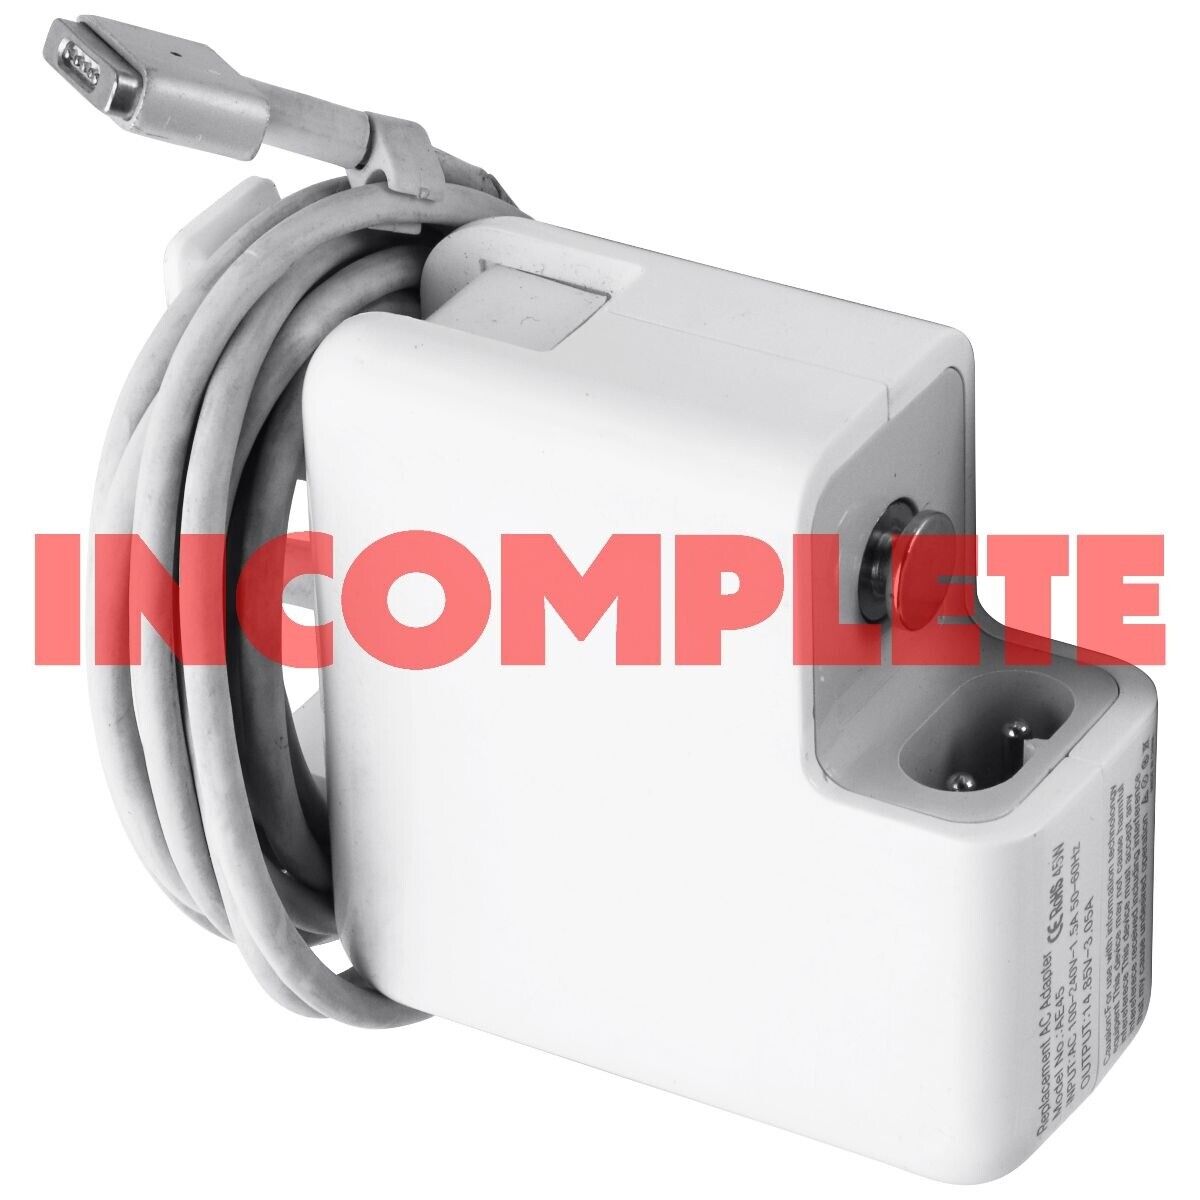 Replacement MagSafe 2 Charger for Apple Devices (AE45) - White